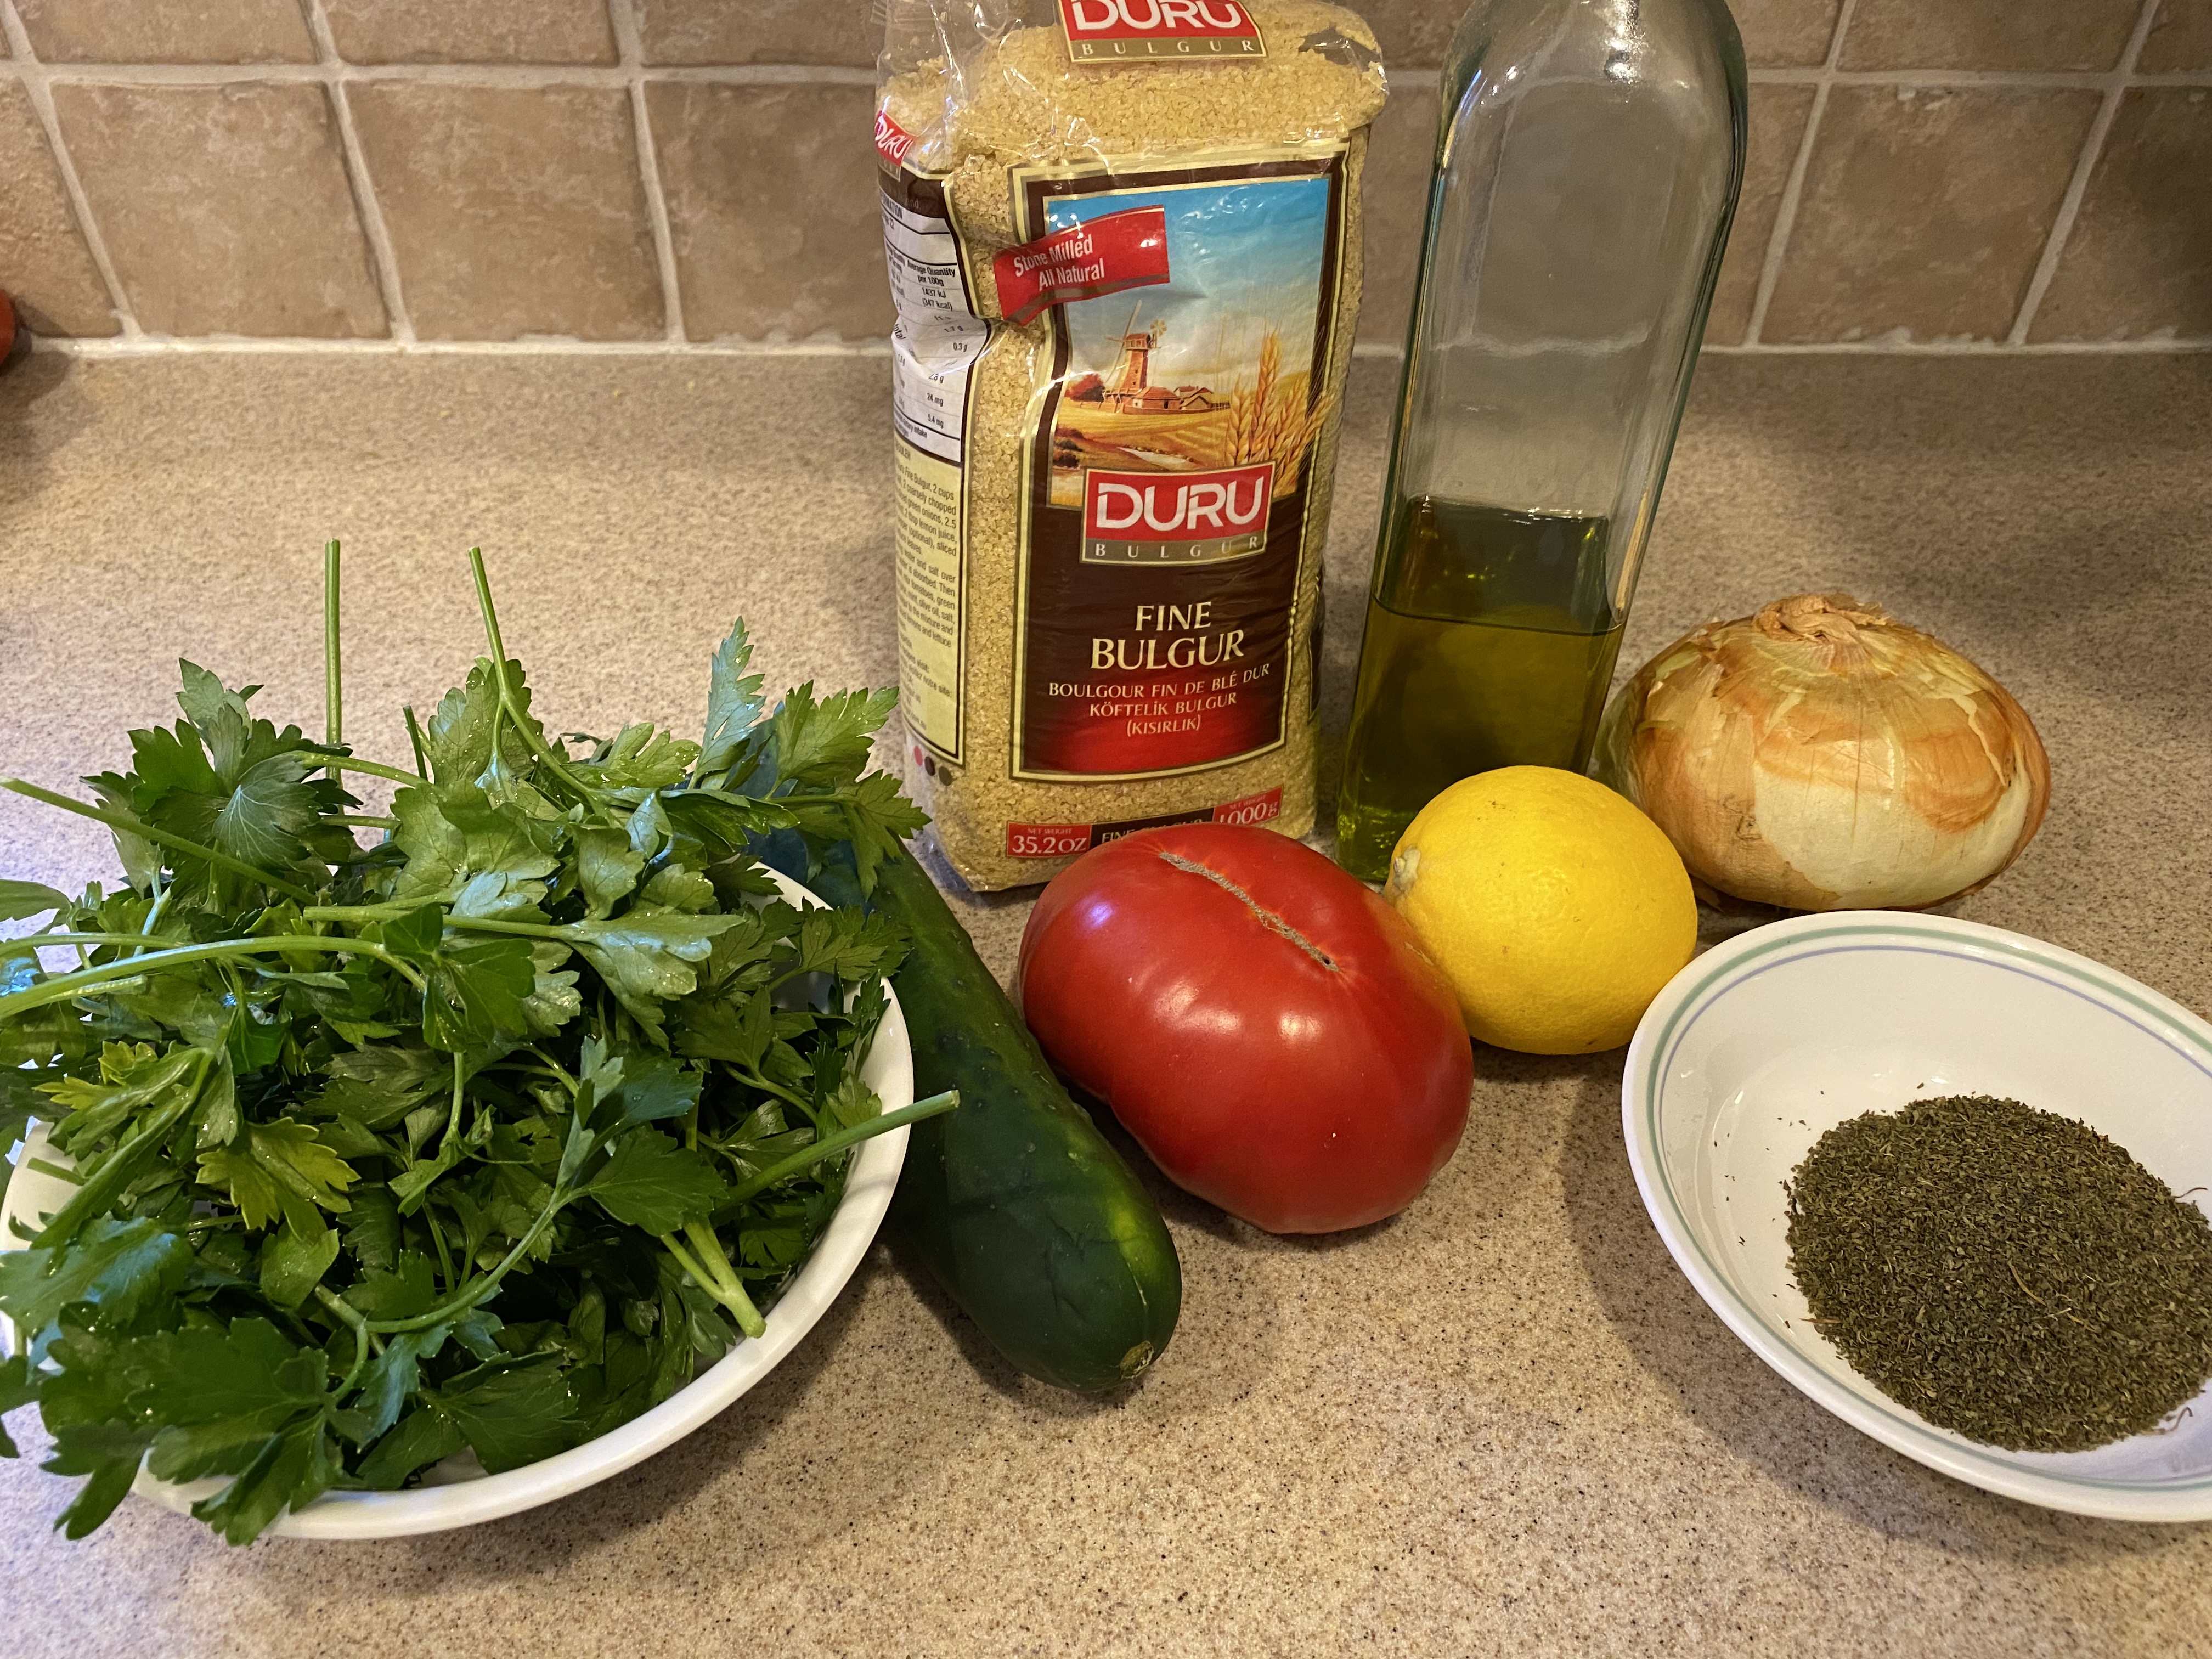 A bag of Duru bran fine bulgur, a bottle of extra virgin olive oil, an onion, a bowl of fresh parsley, a cucumber, a tomato, a lemon, and a bowl of dried, crushed mint, salt, and pepper on a kitchen counter.